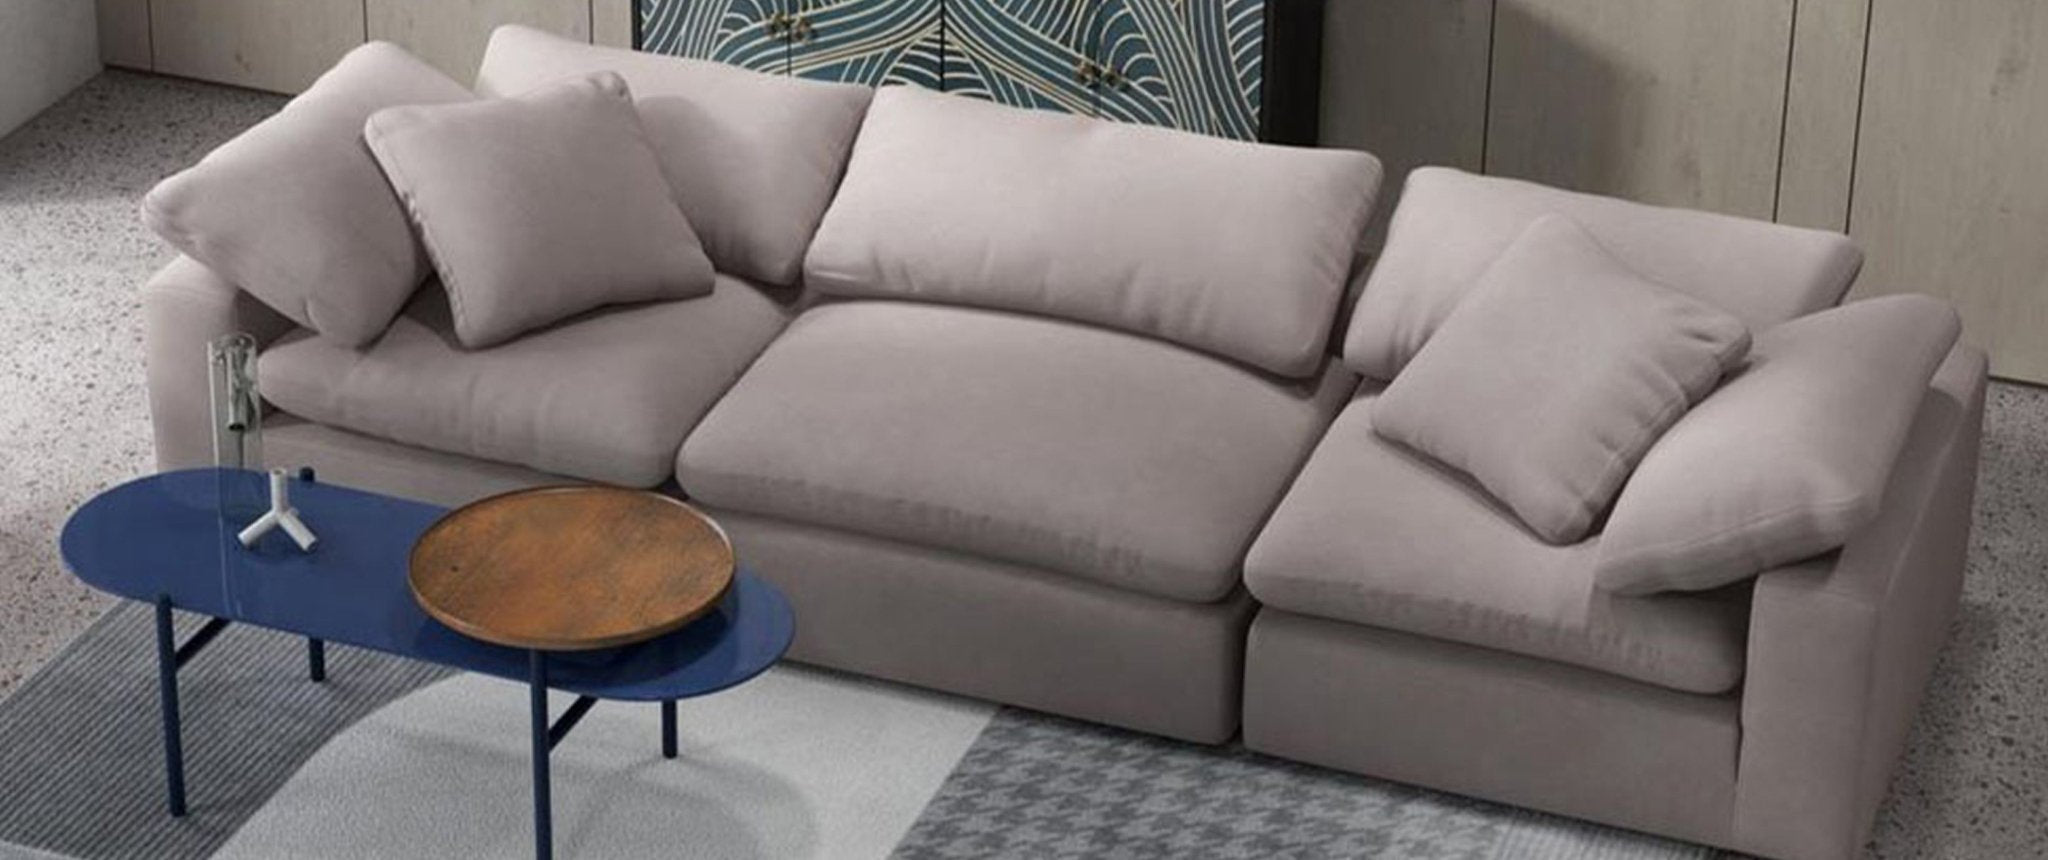 Our Favourite Modular Couch – Sofa Potatoes Furnishings